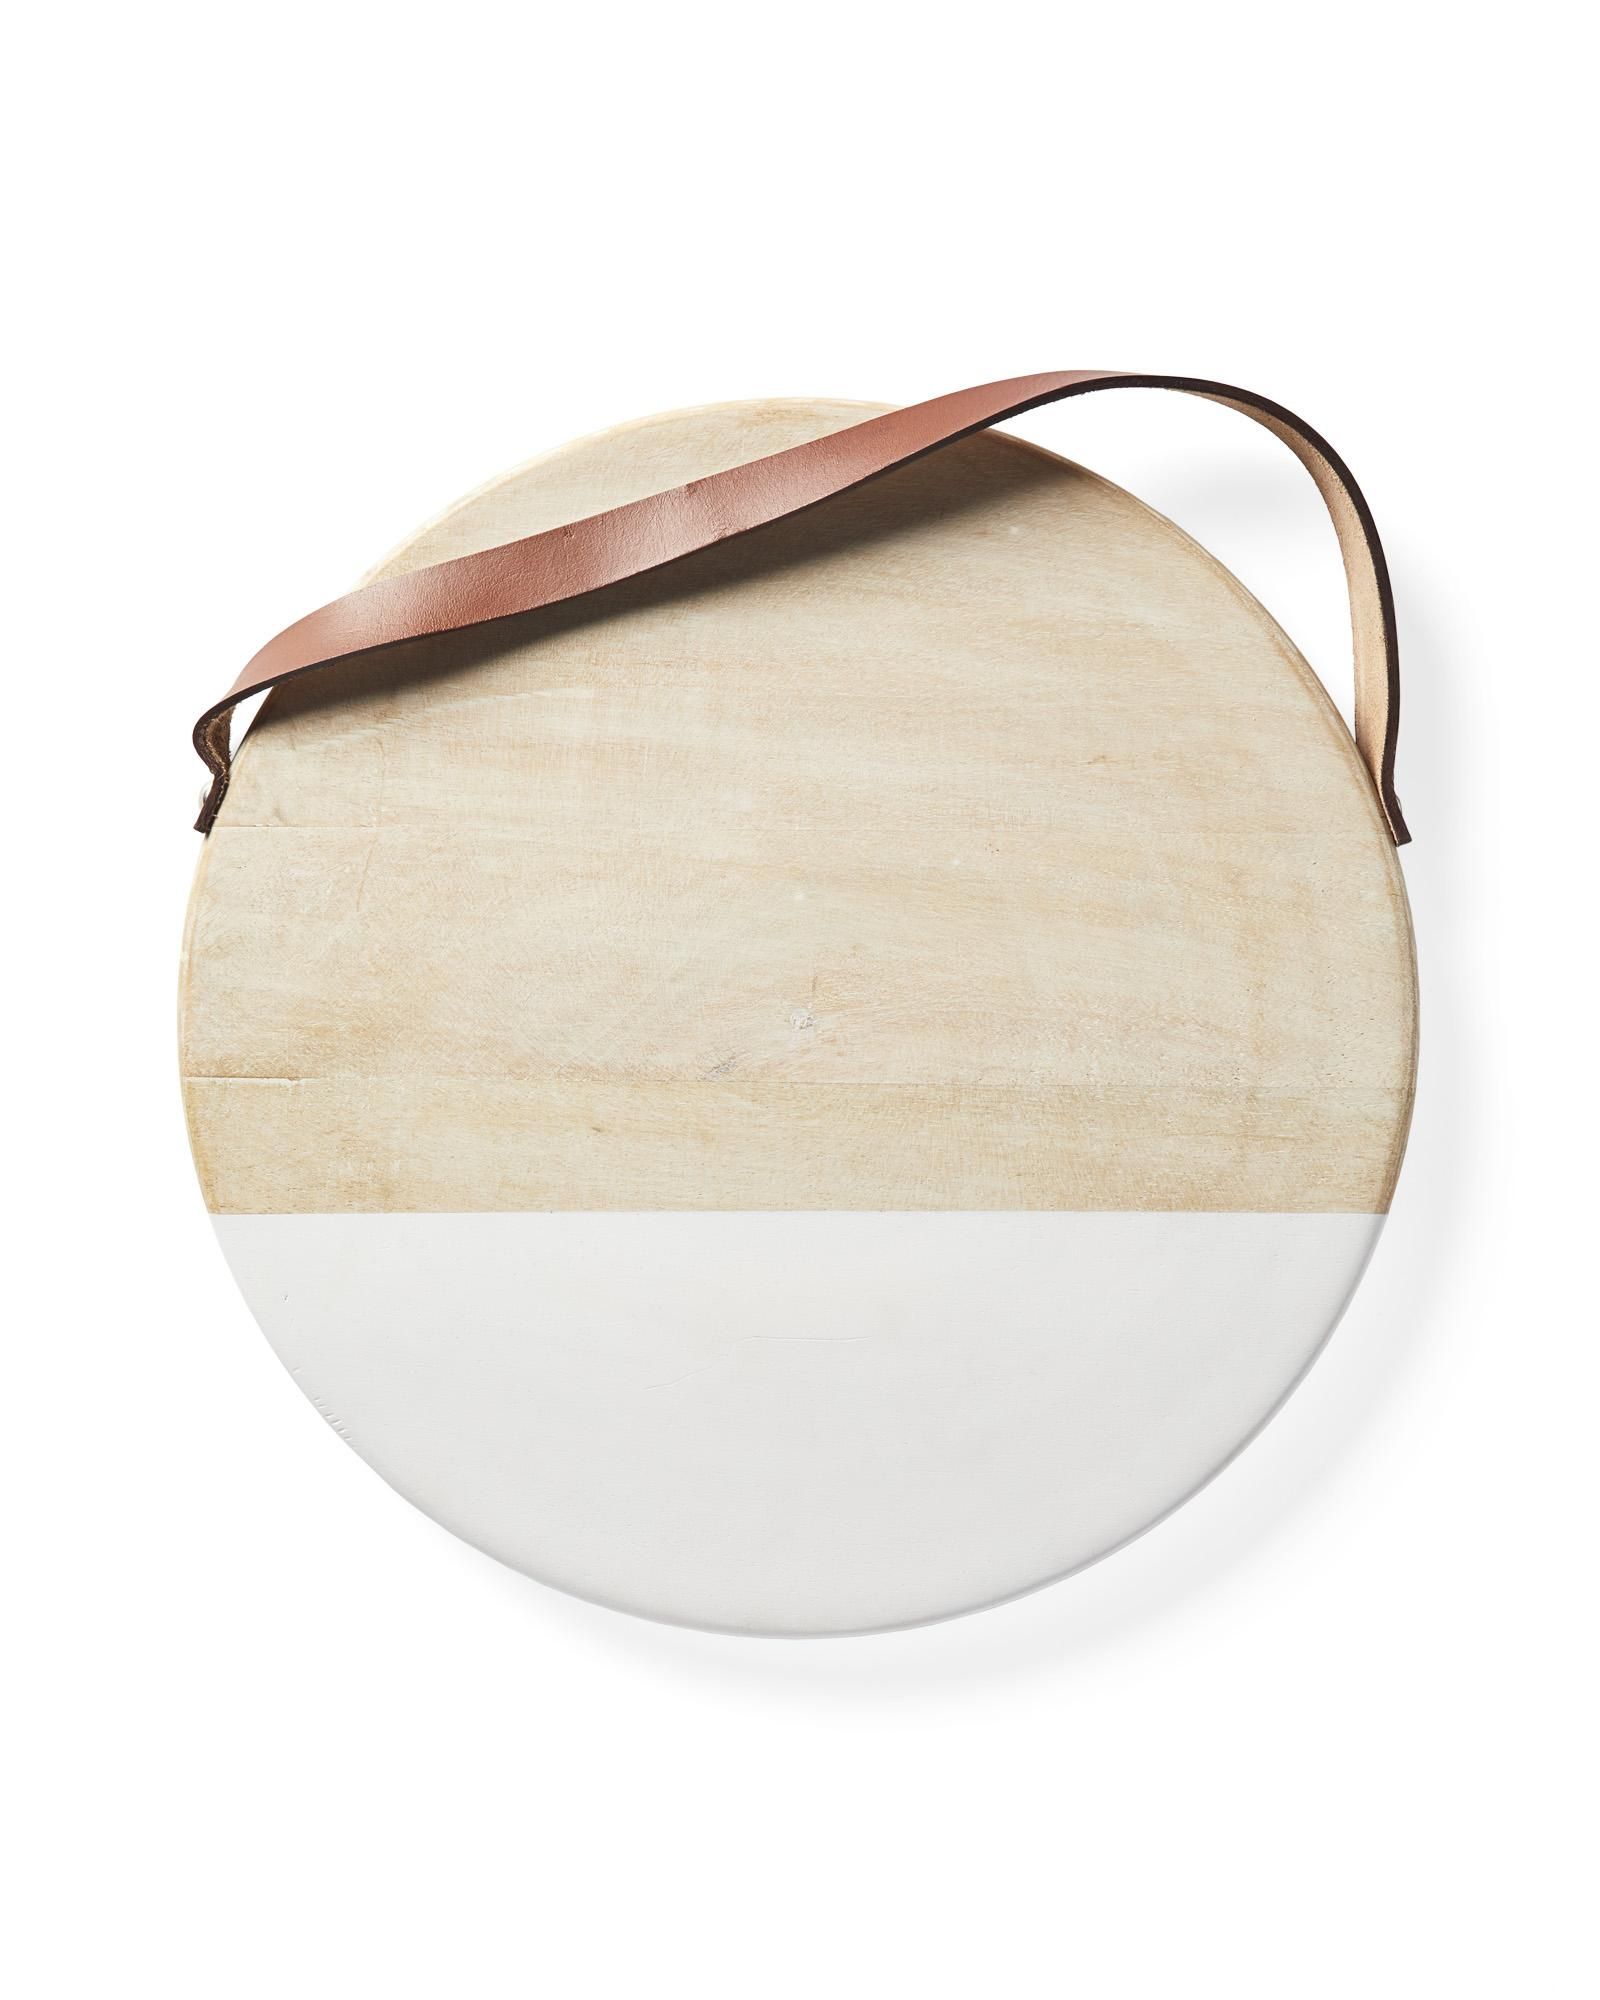 Beachside Serving Board | Serena and Lily